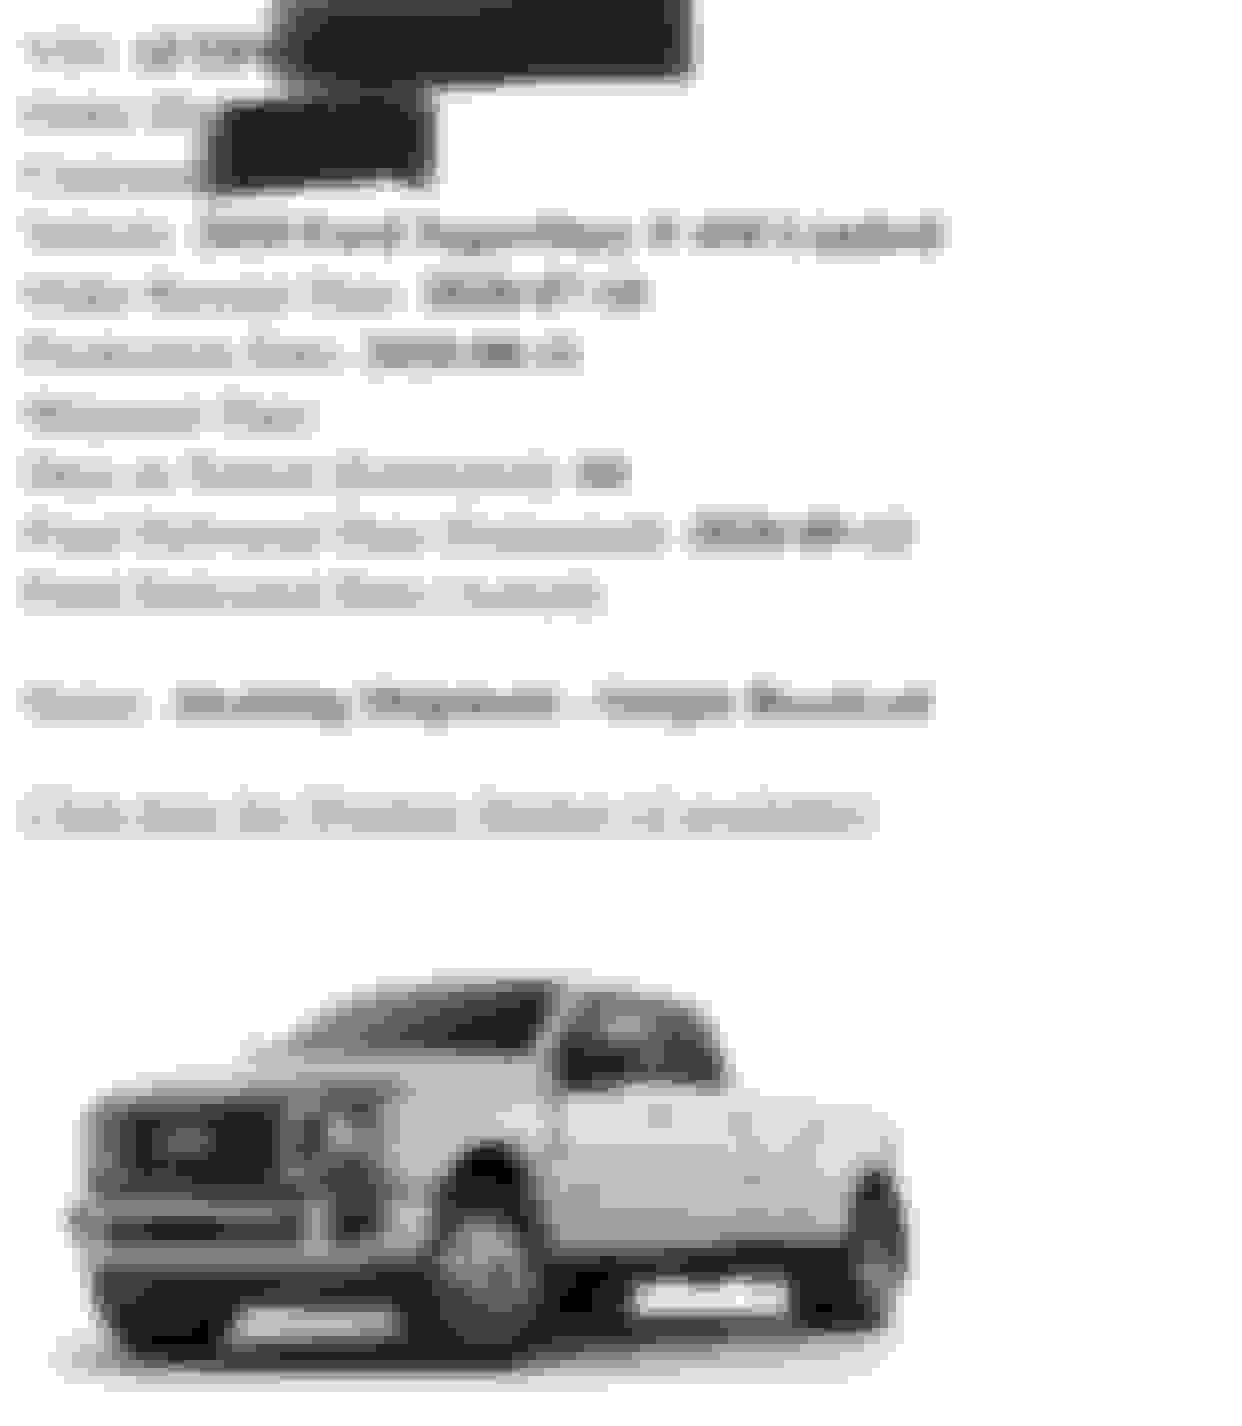 2020 Ford Super Duty Order Tracking. Please no off topic - Page 115